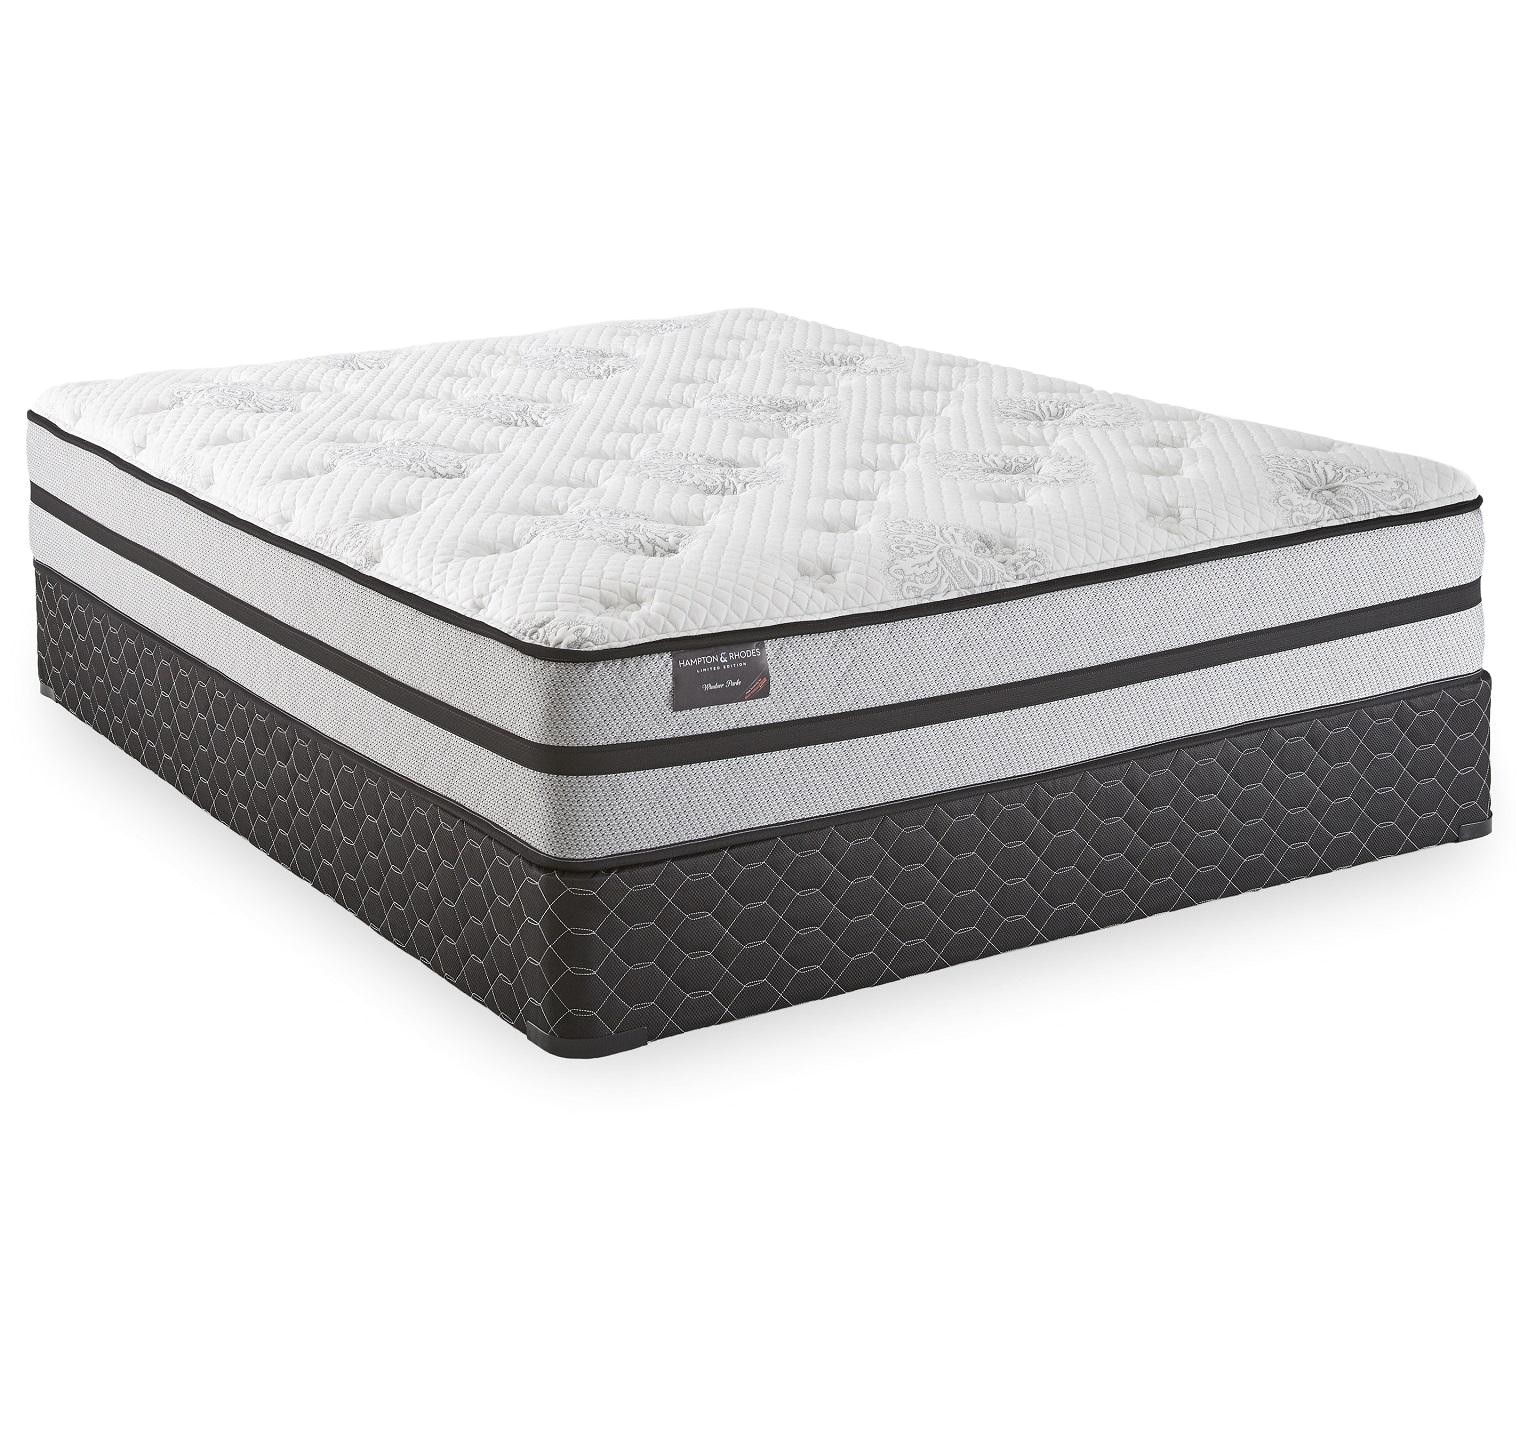 Hampton and Rhodes Limited Edition Queen Mattress Limited Edition Windsor Parke 12 75 Quot Plush Mattress